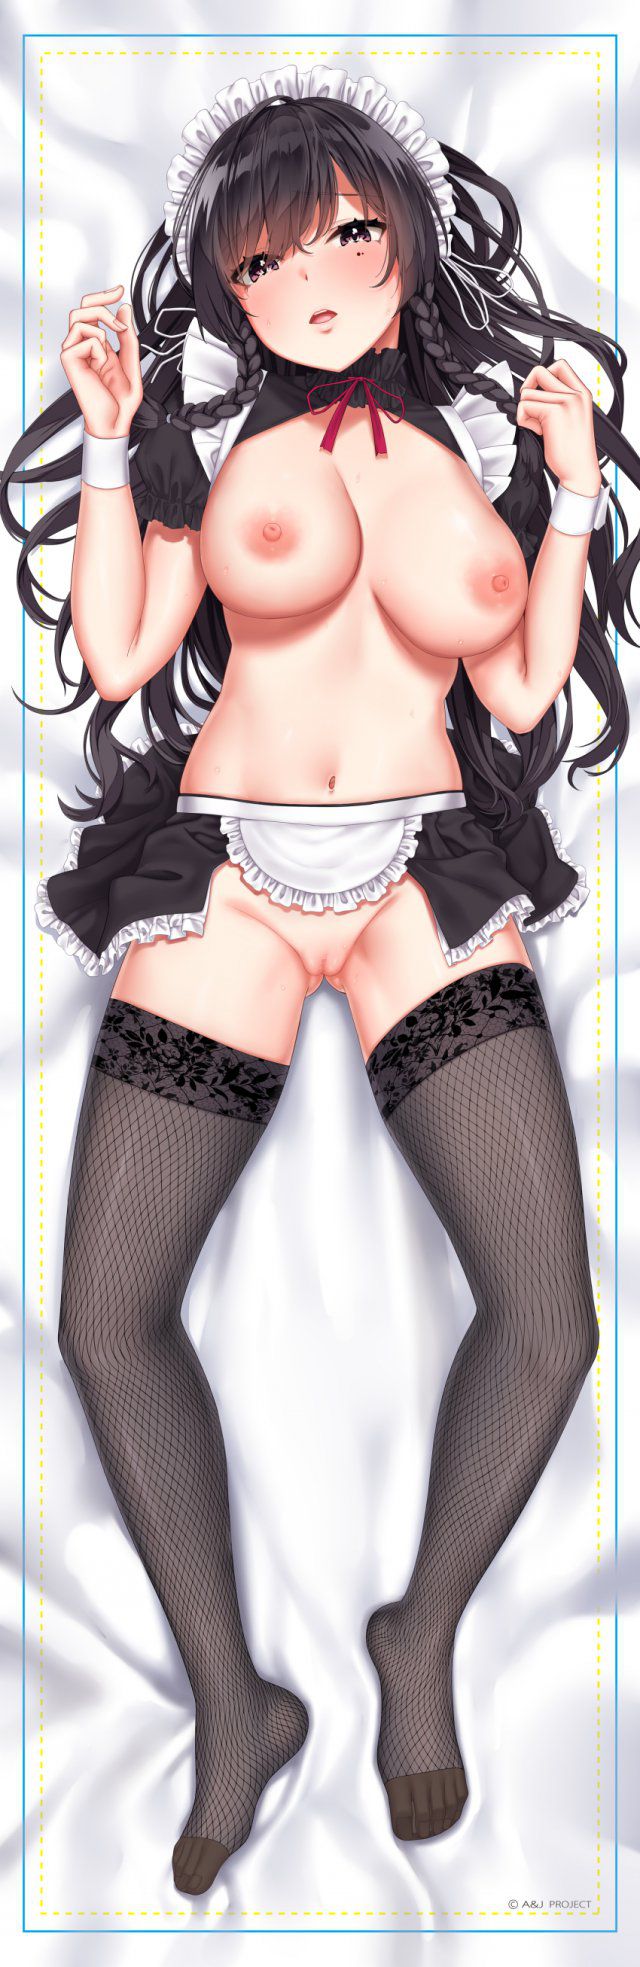 【Secondary】Maid girl image 【Elo】 Part 7 26